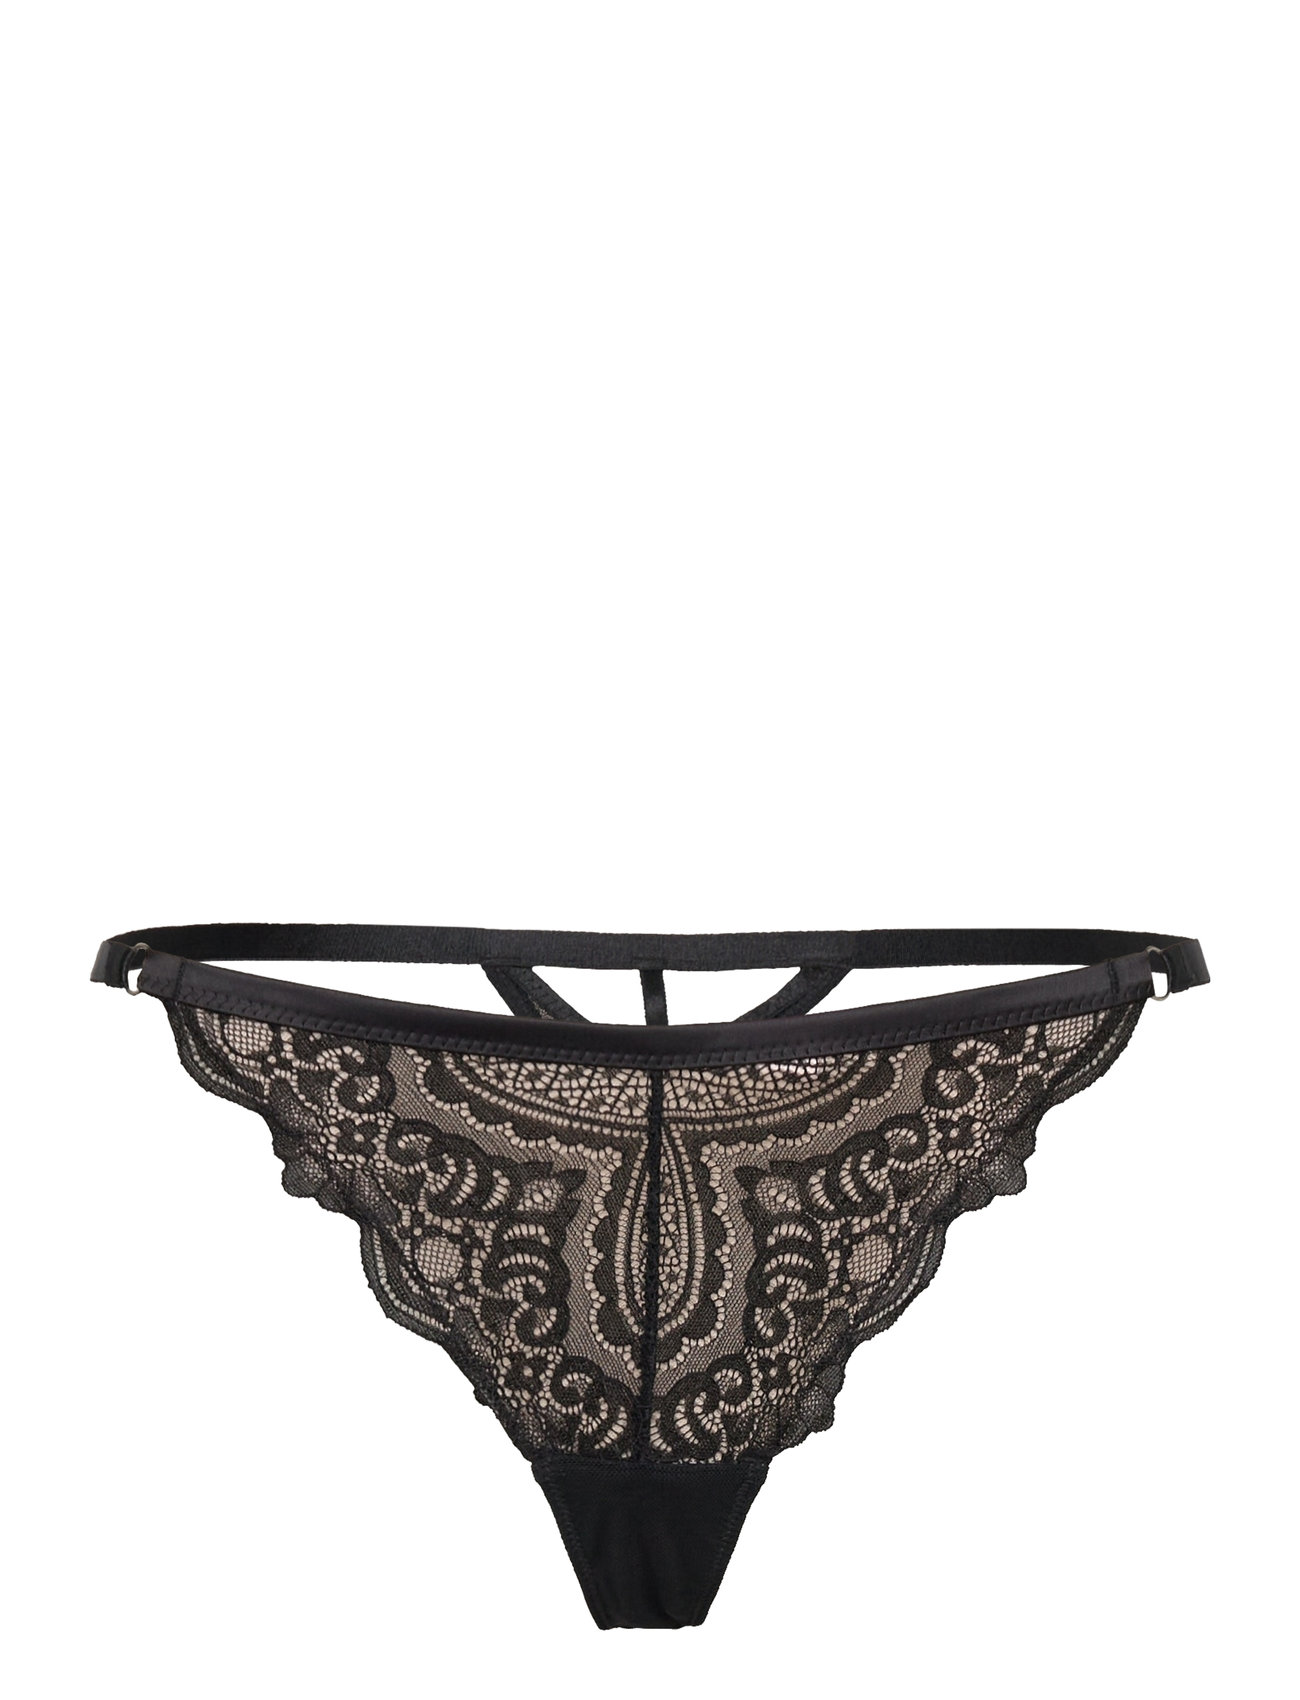 Cotton extra low thong for €7.99 - Thongs - Hunkemöller